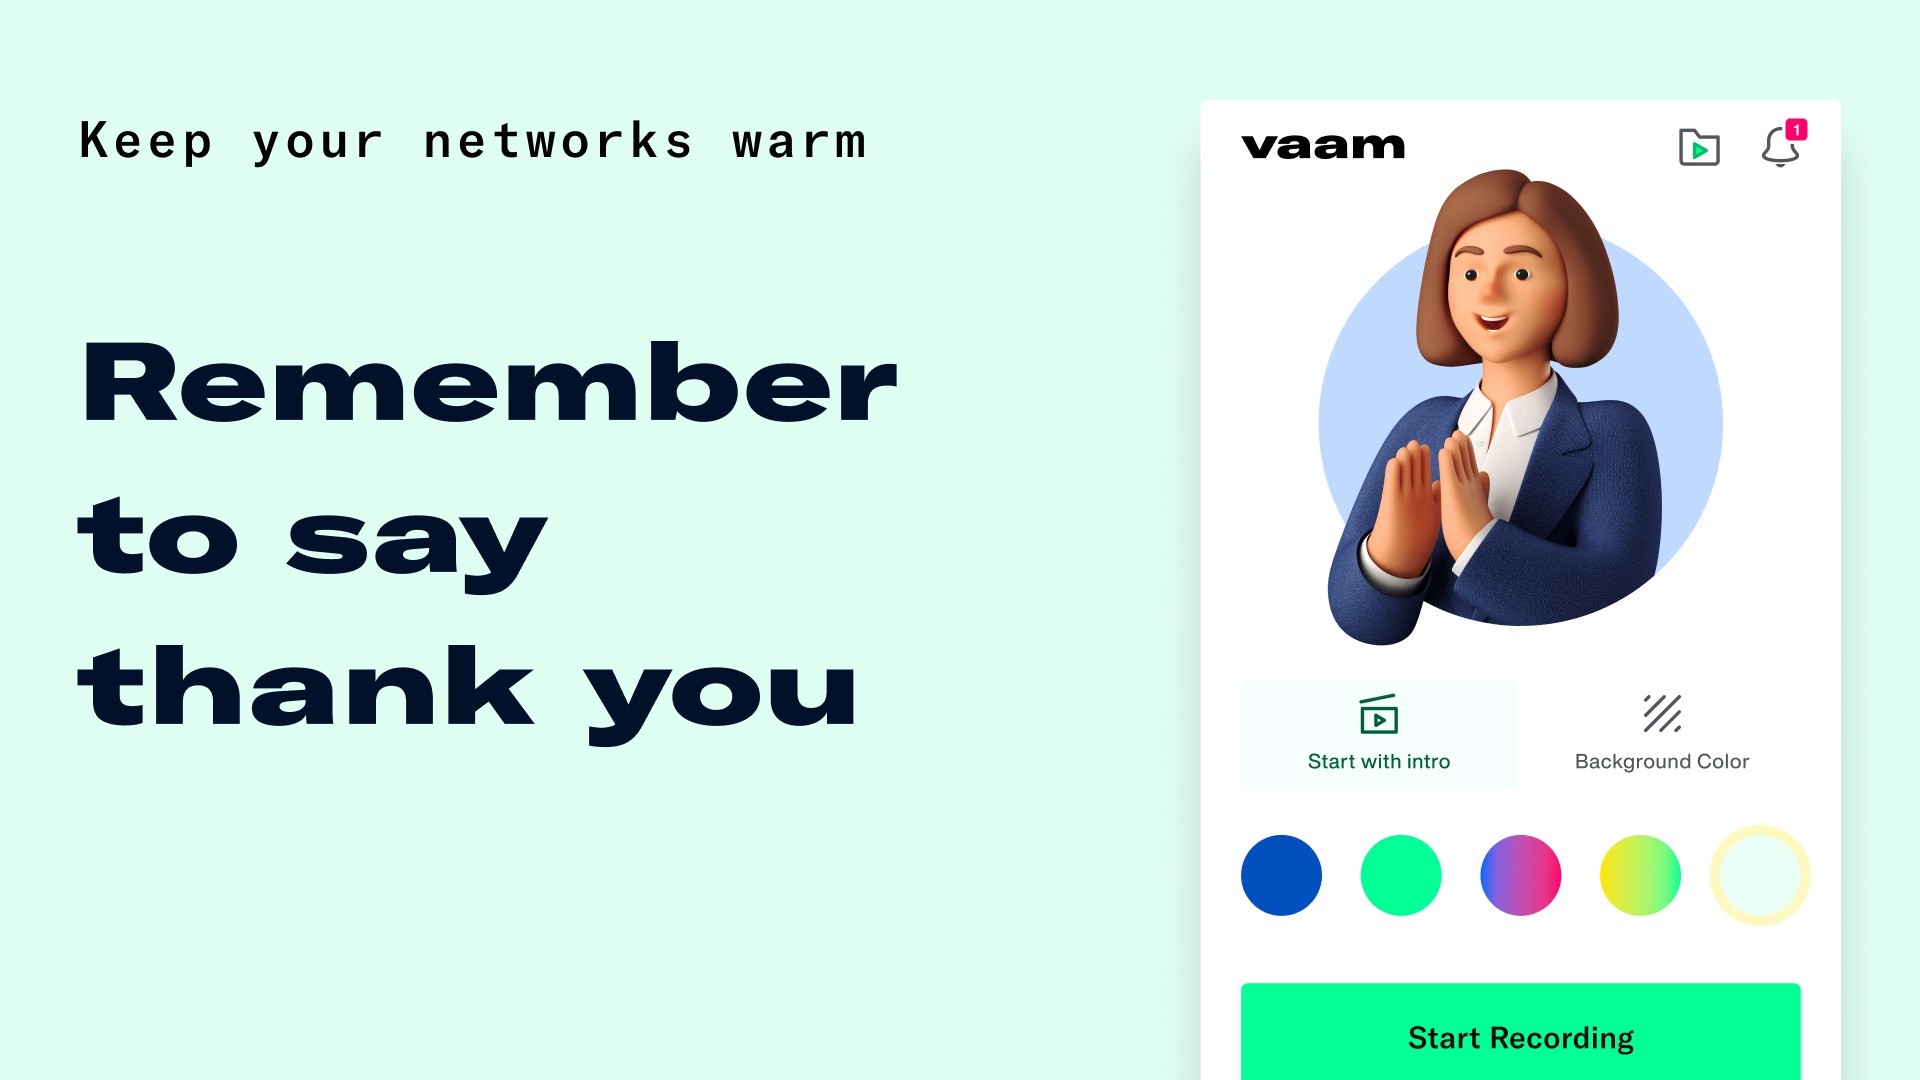 Get feedback from a vast remote working audience about Vaam